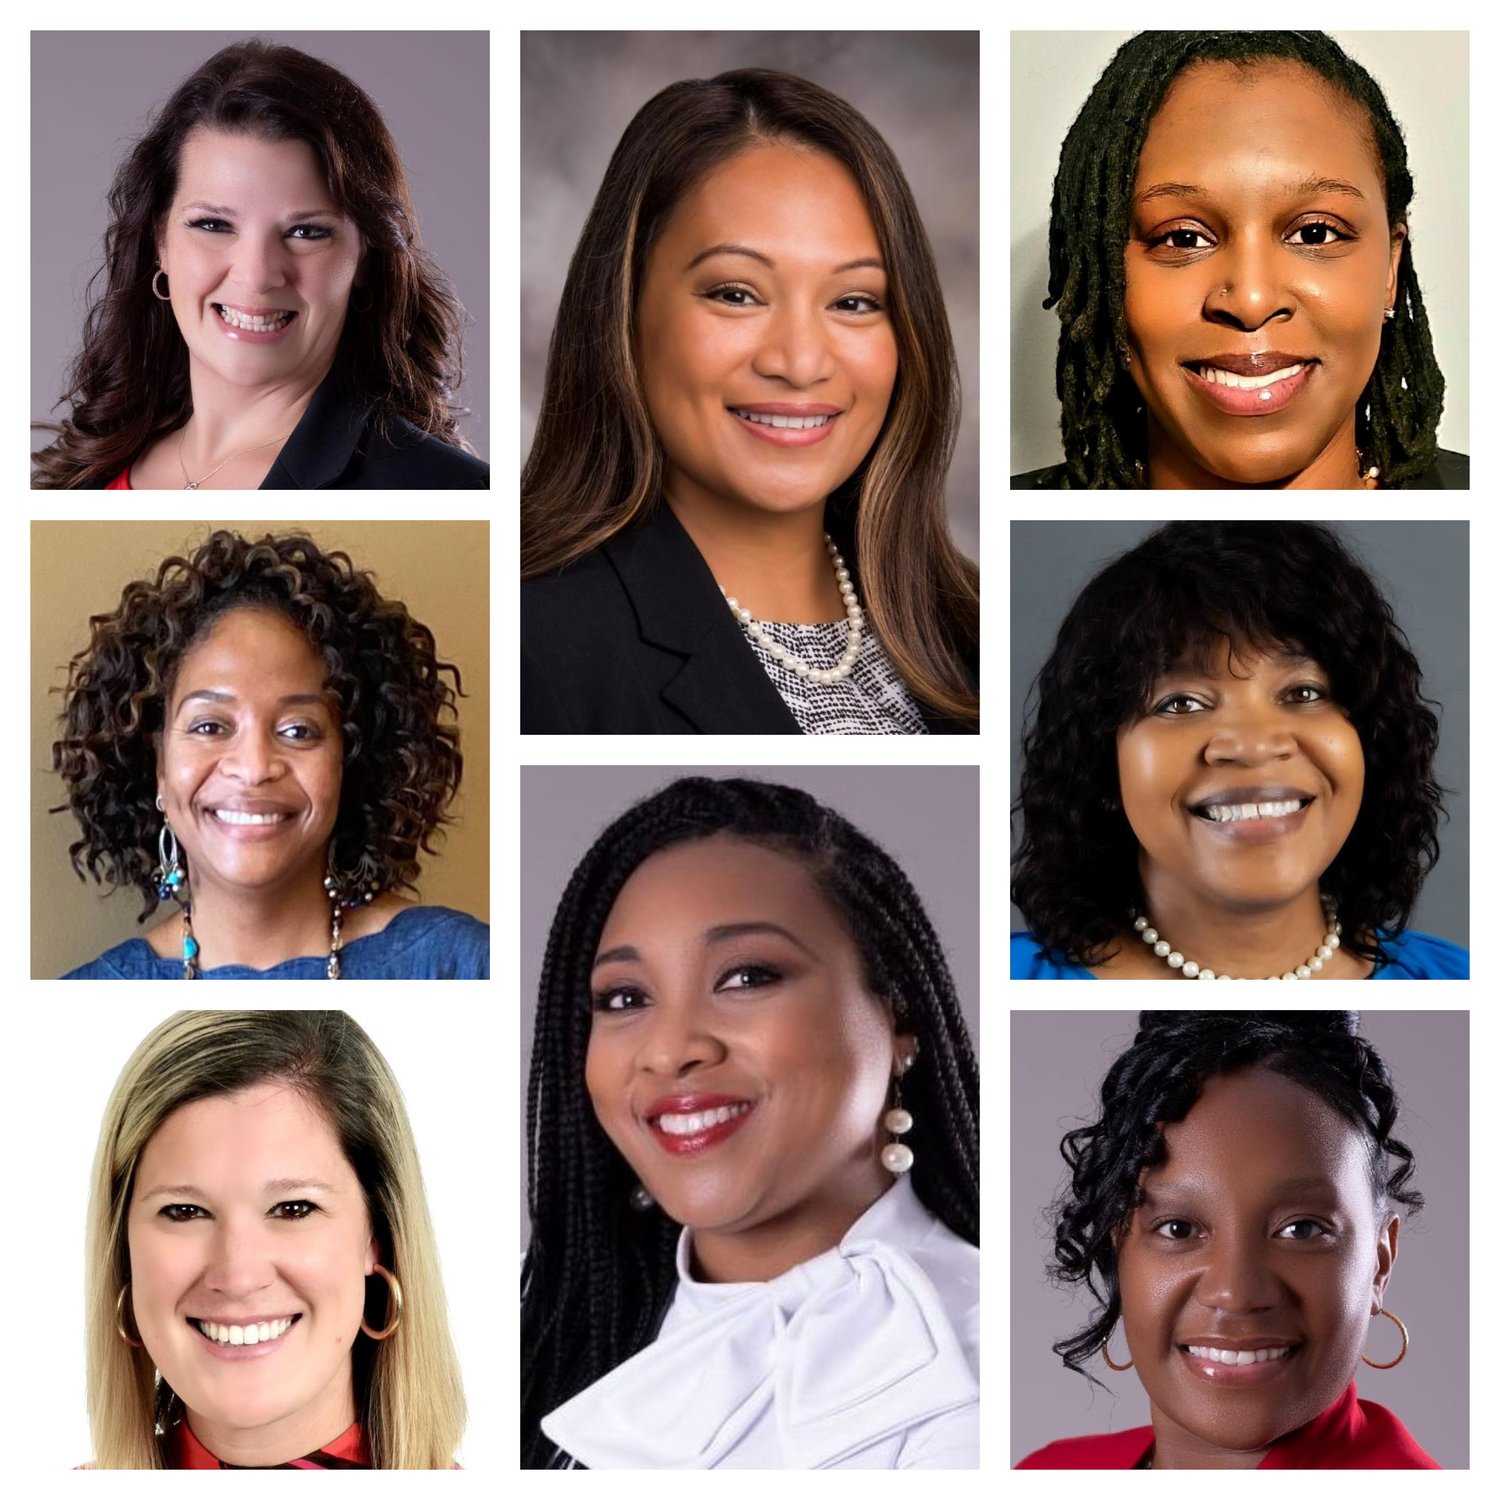 Eight new principals were approved for the 2022-23 school year by the Cumberland County Board of Education. They are, from top left: Casey Yates, Brentwood Elementary; Catherine Graham-Johnson, E.E. Miller Elementary; Tiffany Eakins, Elizabeth Cashwell Elementary; Ayanna Richard, Howard Learning Academy; Waylinda Adams, Ponderosa Elementar; Elizabeth Blue, Raleigh Road Elementary; Queesha Tillman, Seventy-First Classical Middle; and Anita McLalaughlin, Sunnyside Elementary.